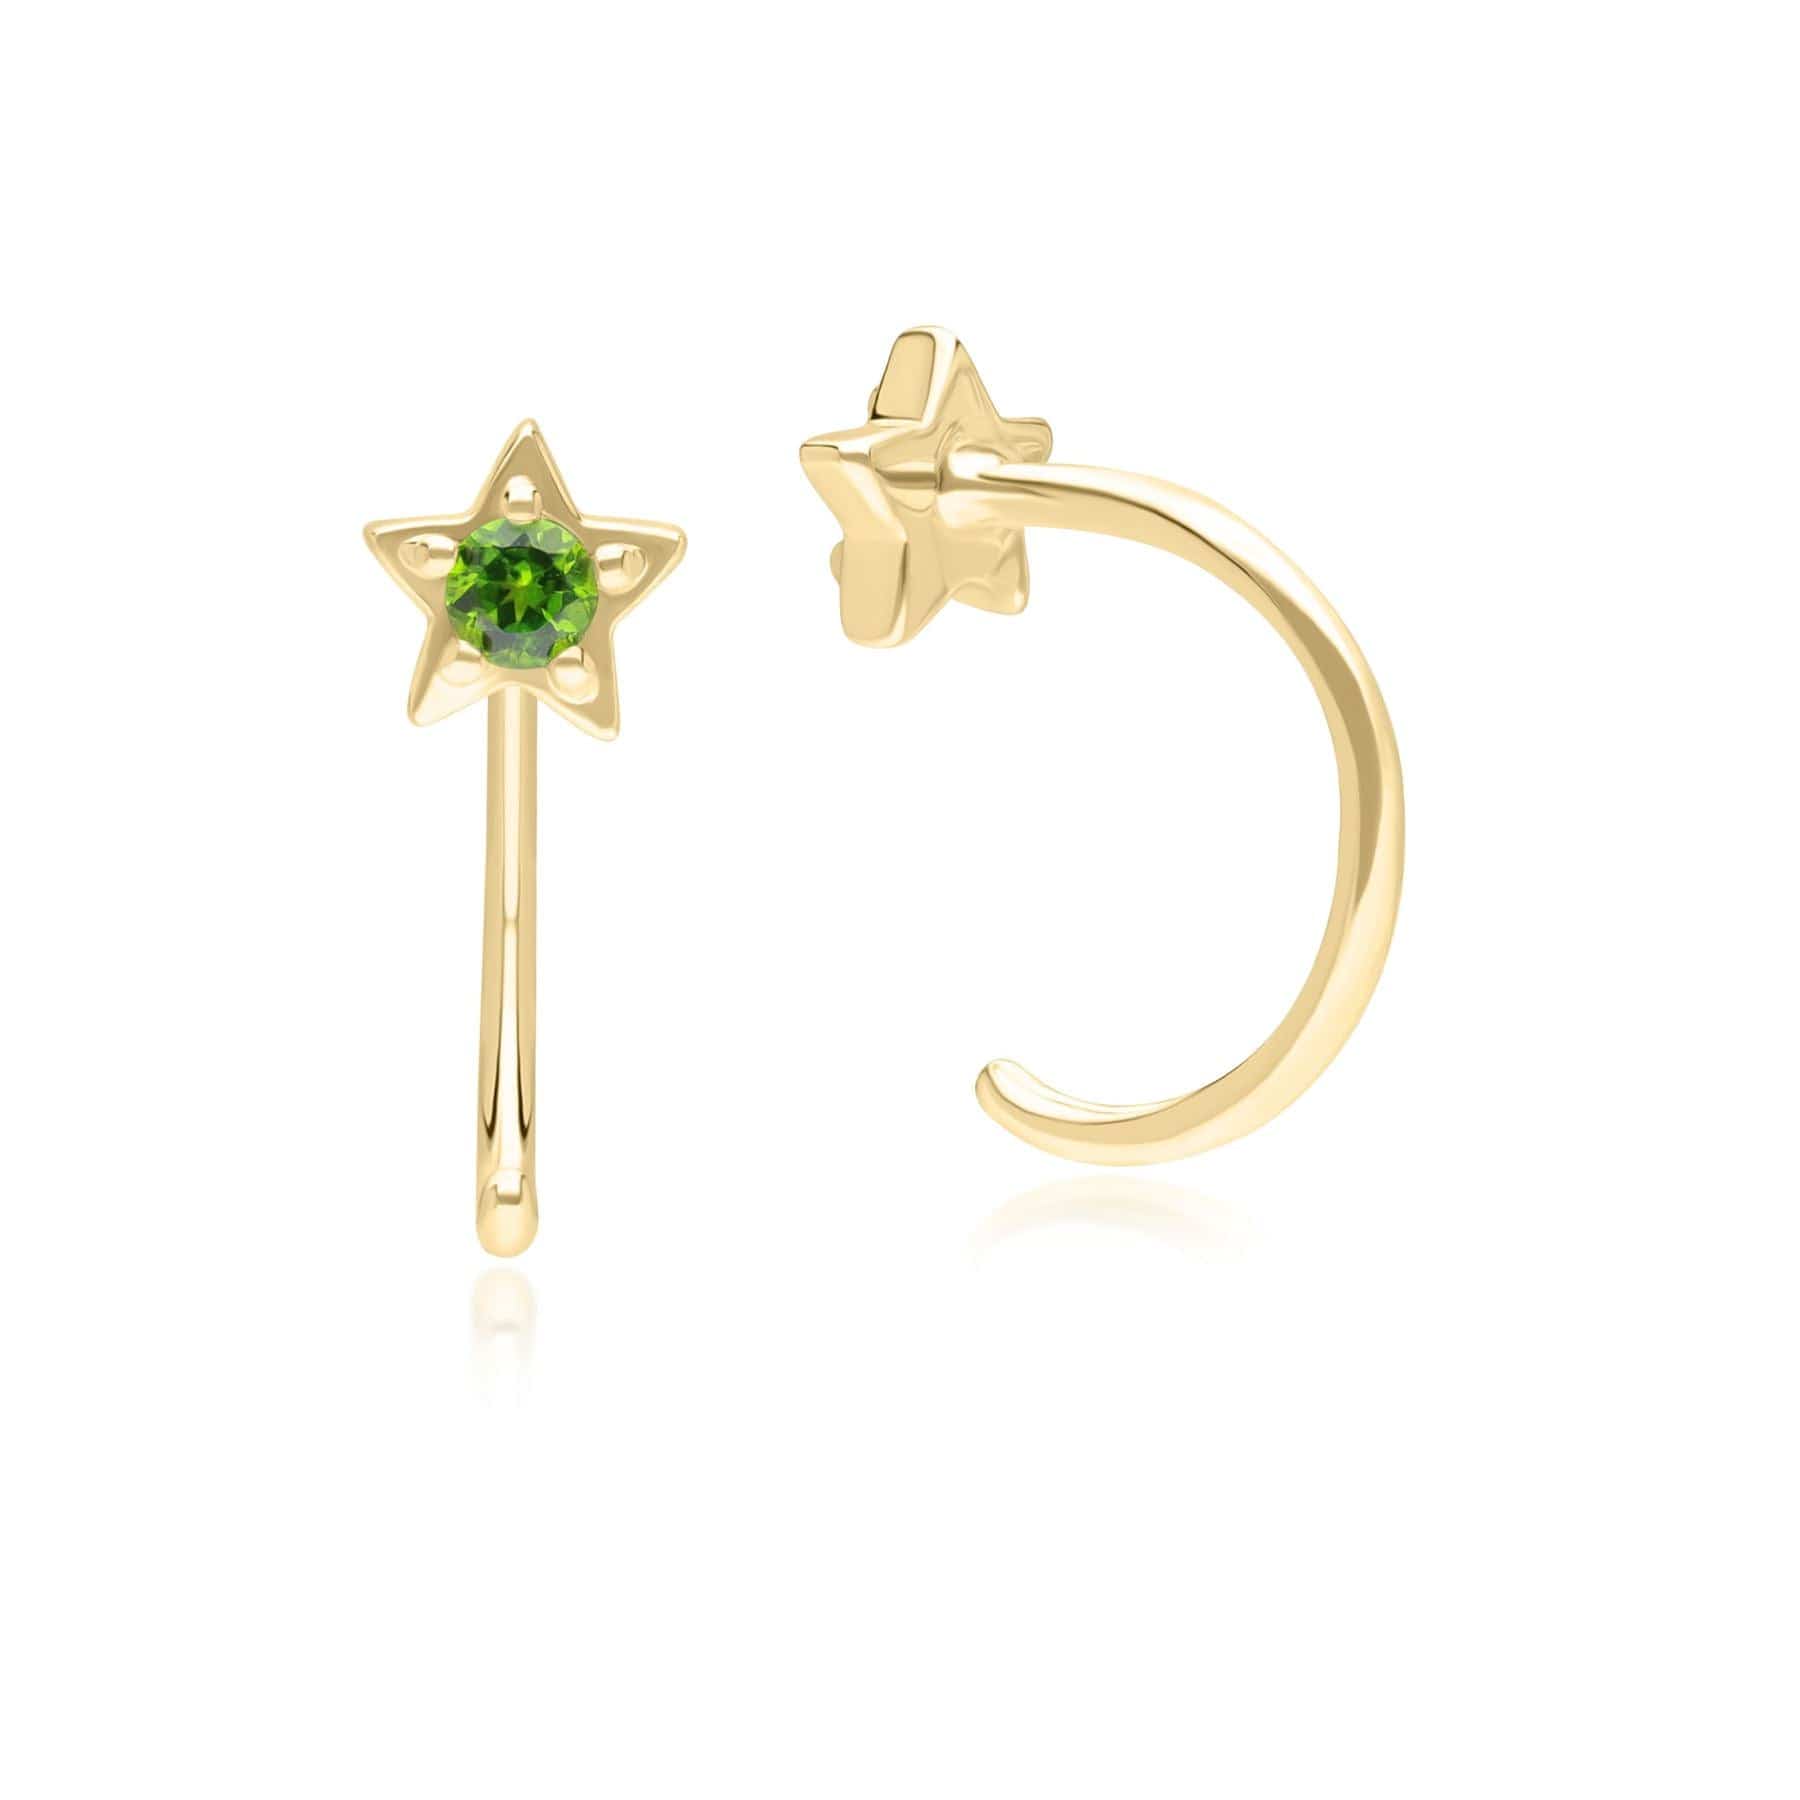 Modern Classic Chrome Diopside Pull Through Hoop Earrings in 9ct Yellow Gold - Gemondo